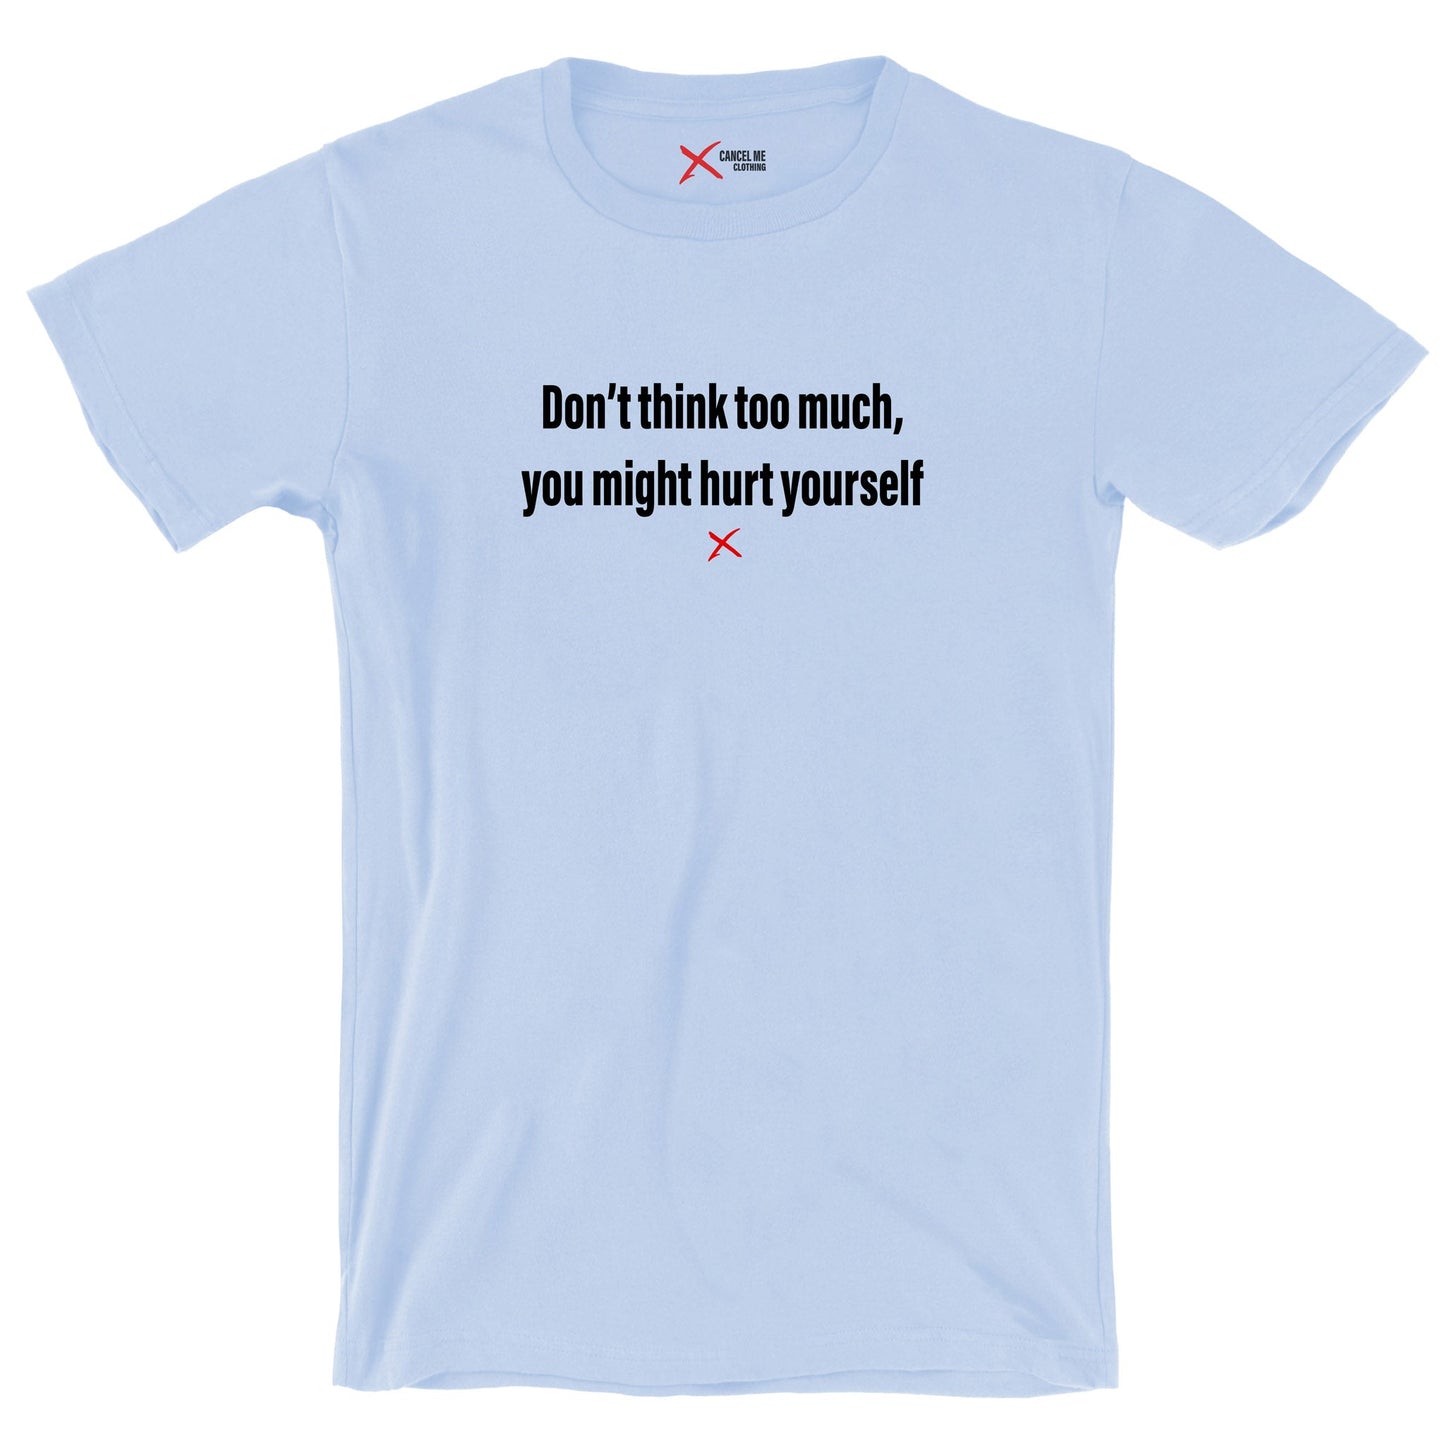 Don't think too much, you might hurt yourself - Shirt